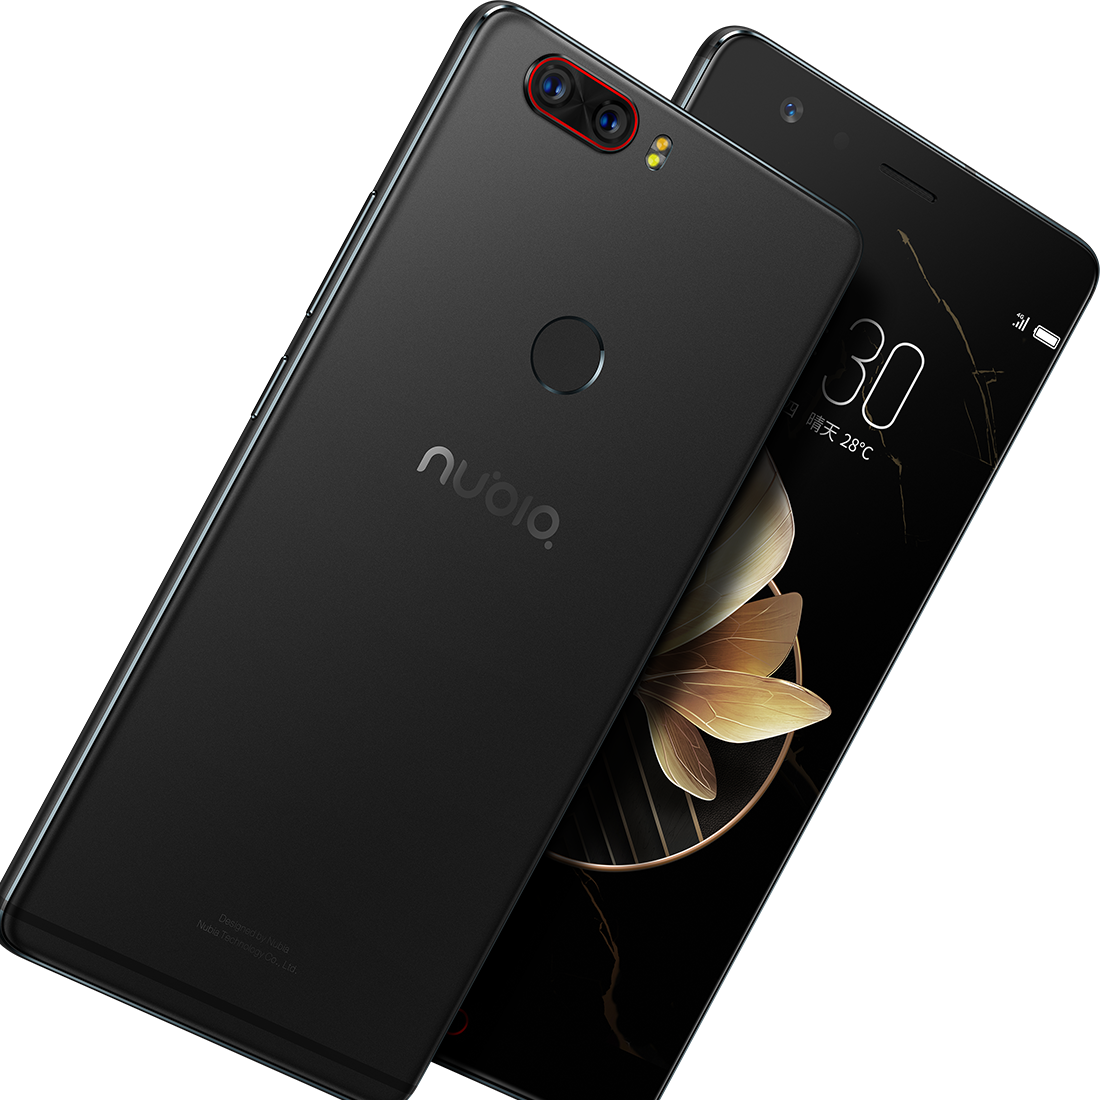 nubia-z17-official-01.png